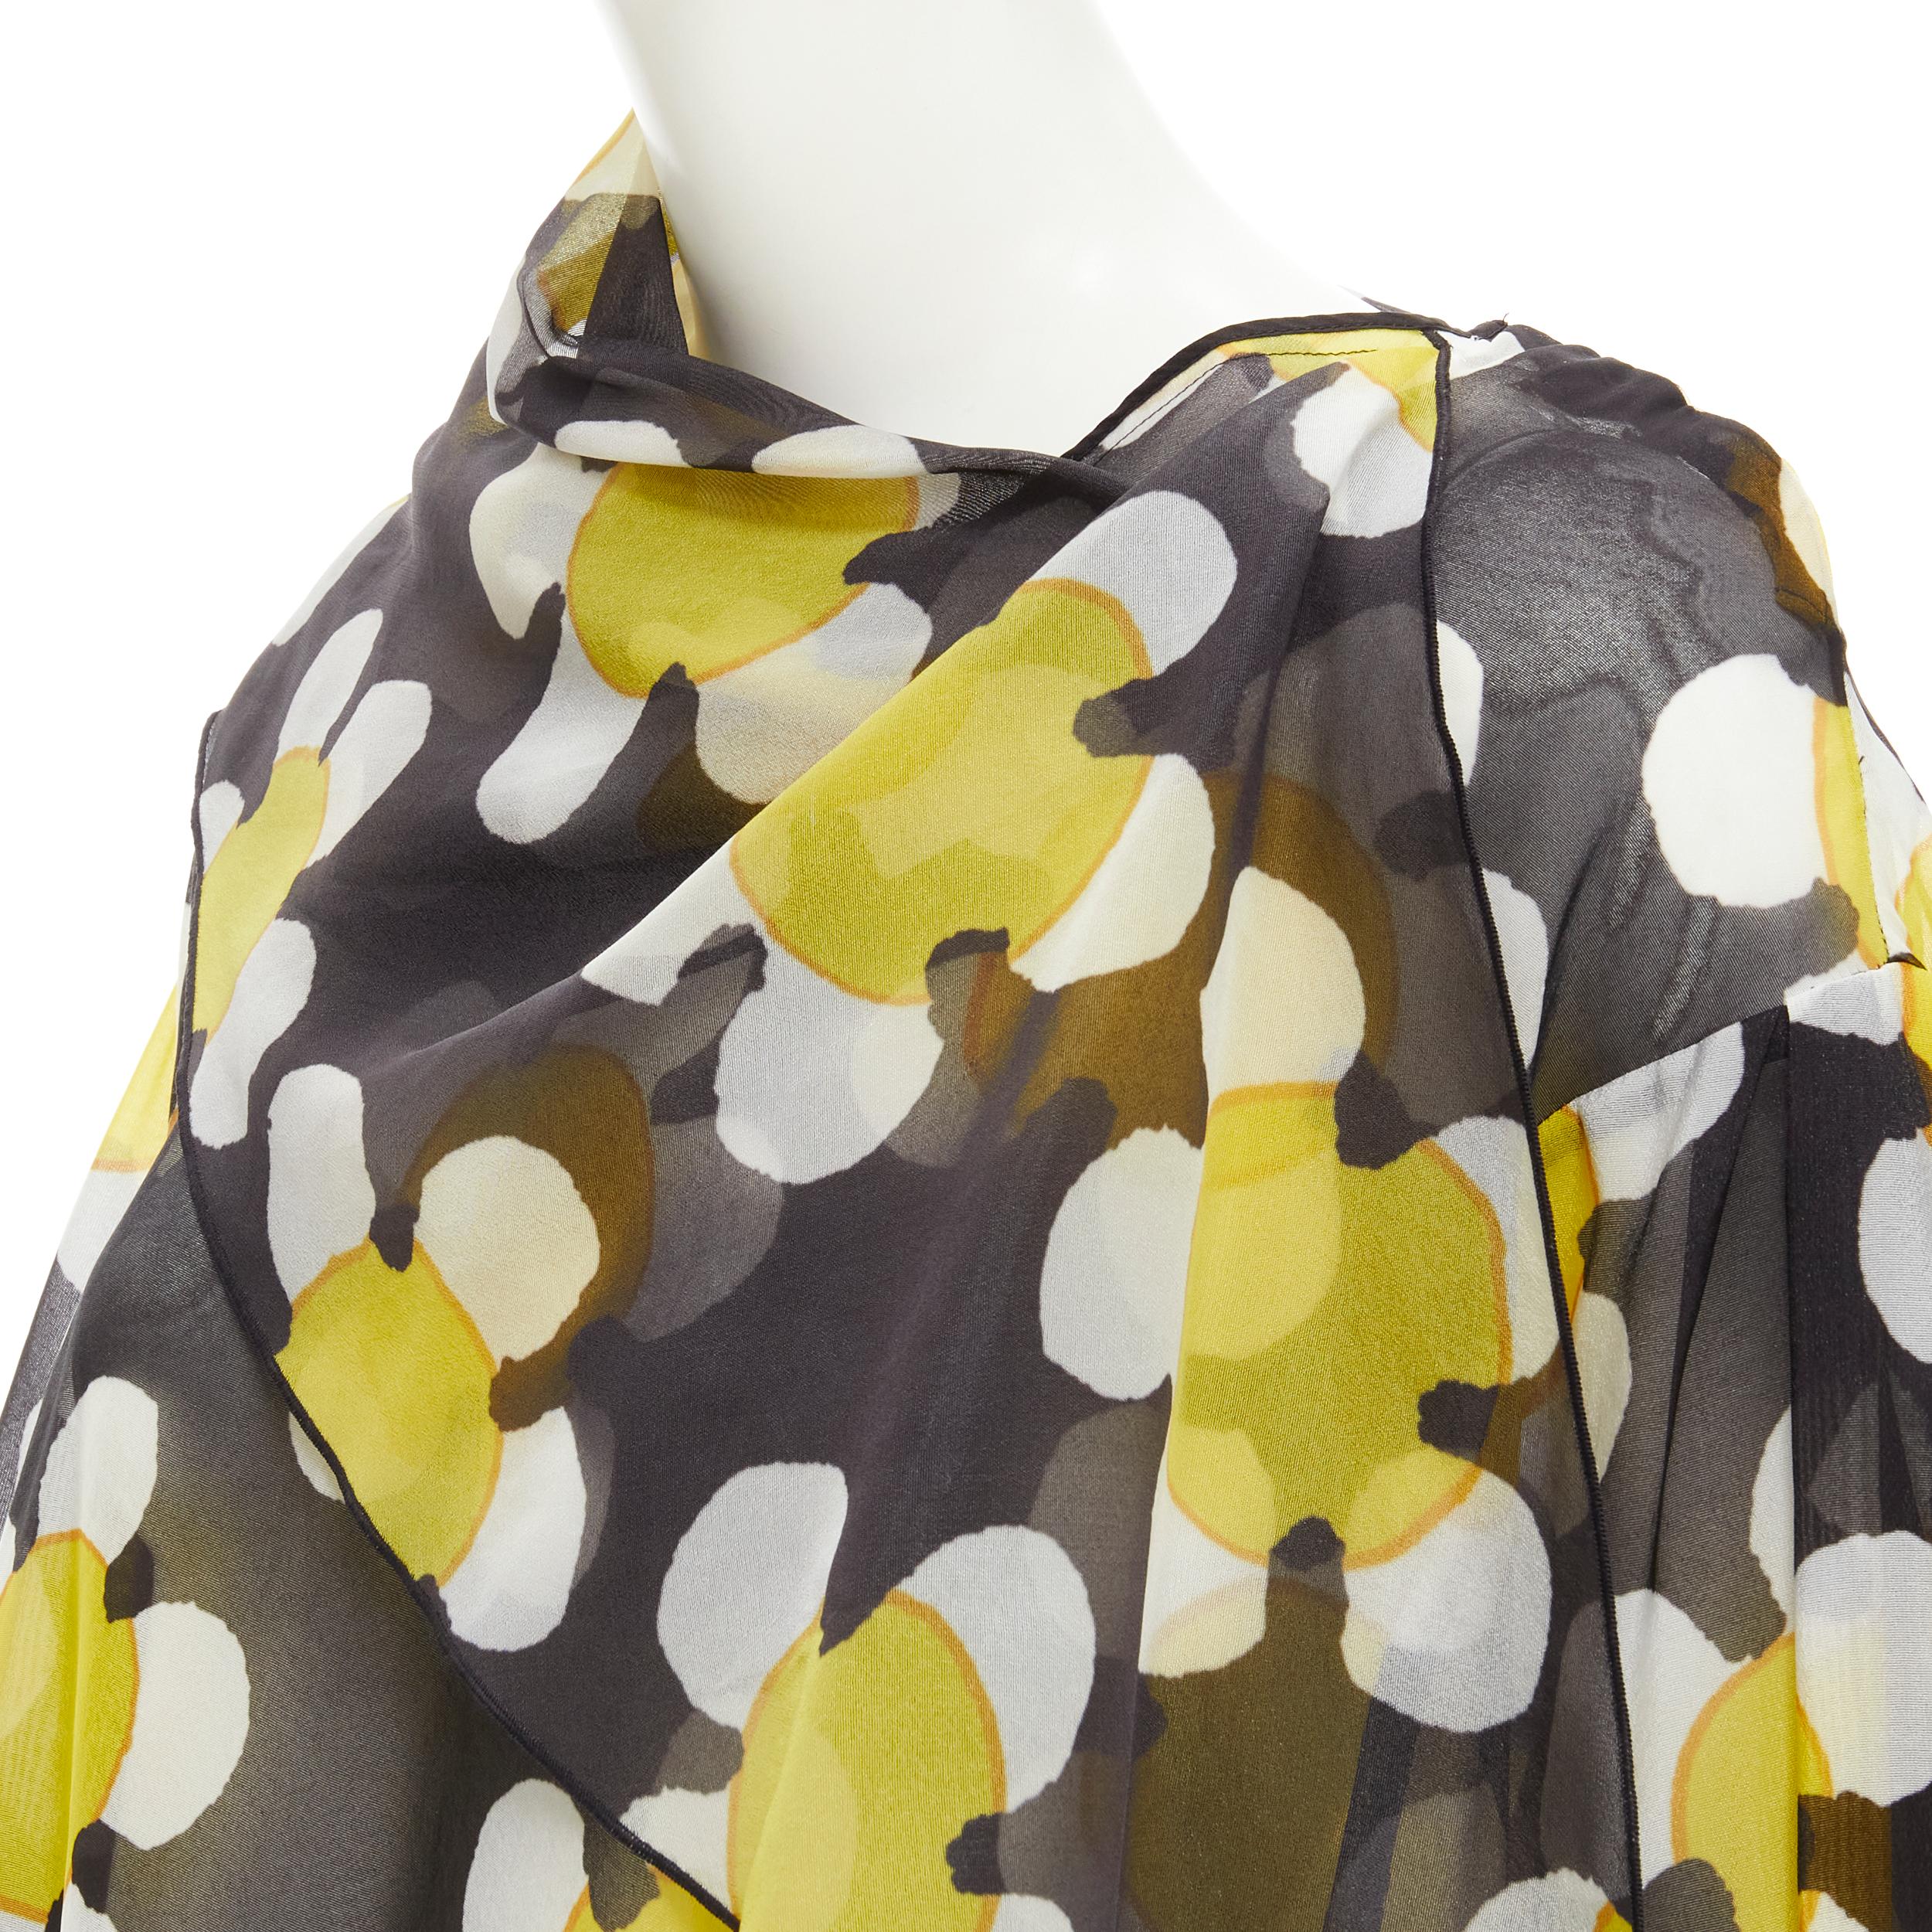 MARC JACOBS black yelow daisy draped neckline blouse top US2 XS 
Reference: CELG/A00216 
Brand: Marc Jacobs 
Material: Triacetate 
Color: Black 
Pattern: Floral 
Closure: Button 
Extra Detail: Snap button at shoulder. Draped scarf neckline.